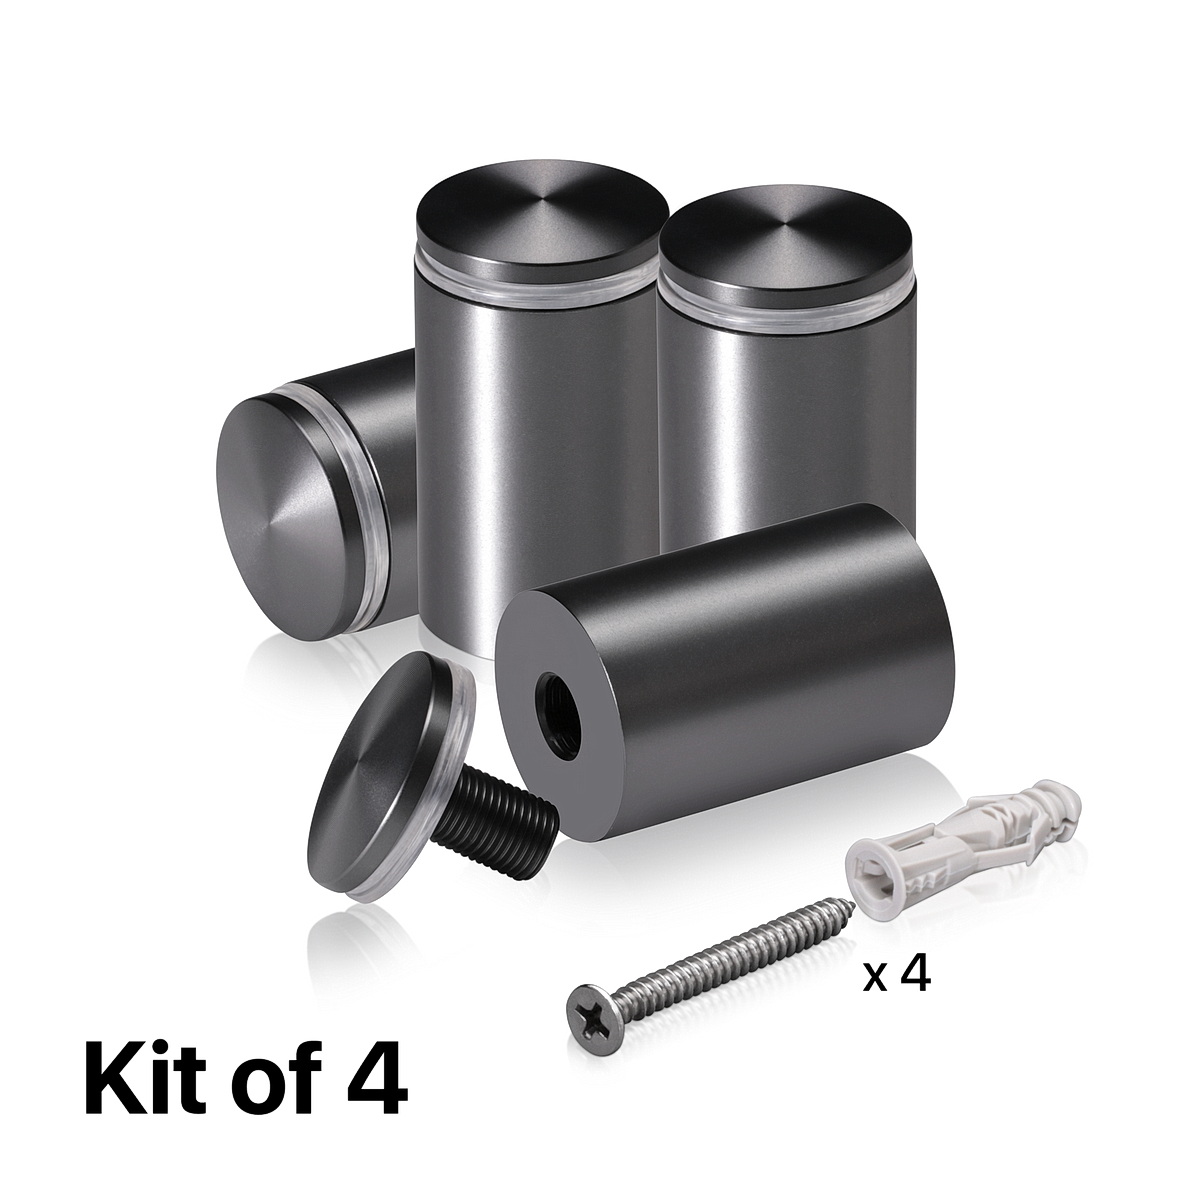 (Set of 4) 1-1/4'' Diameter X 1-3/4'' Barrel Length, Aluminum Rounded Head Standoffs, Titanium Anodized Finish Standoff with (4) 2216Z Screws and (4) LANC1 Anchors for concrete or drywall (For Inside / Outside use) [Required Material Hole Size: 7/16'']